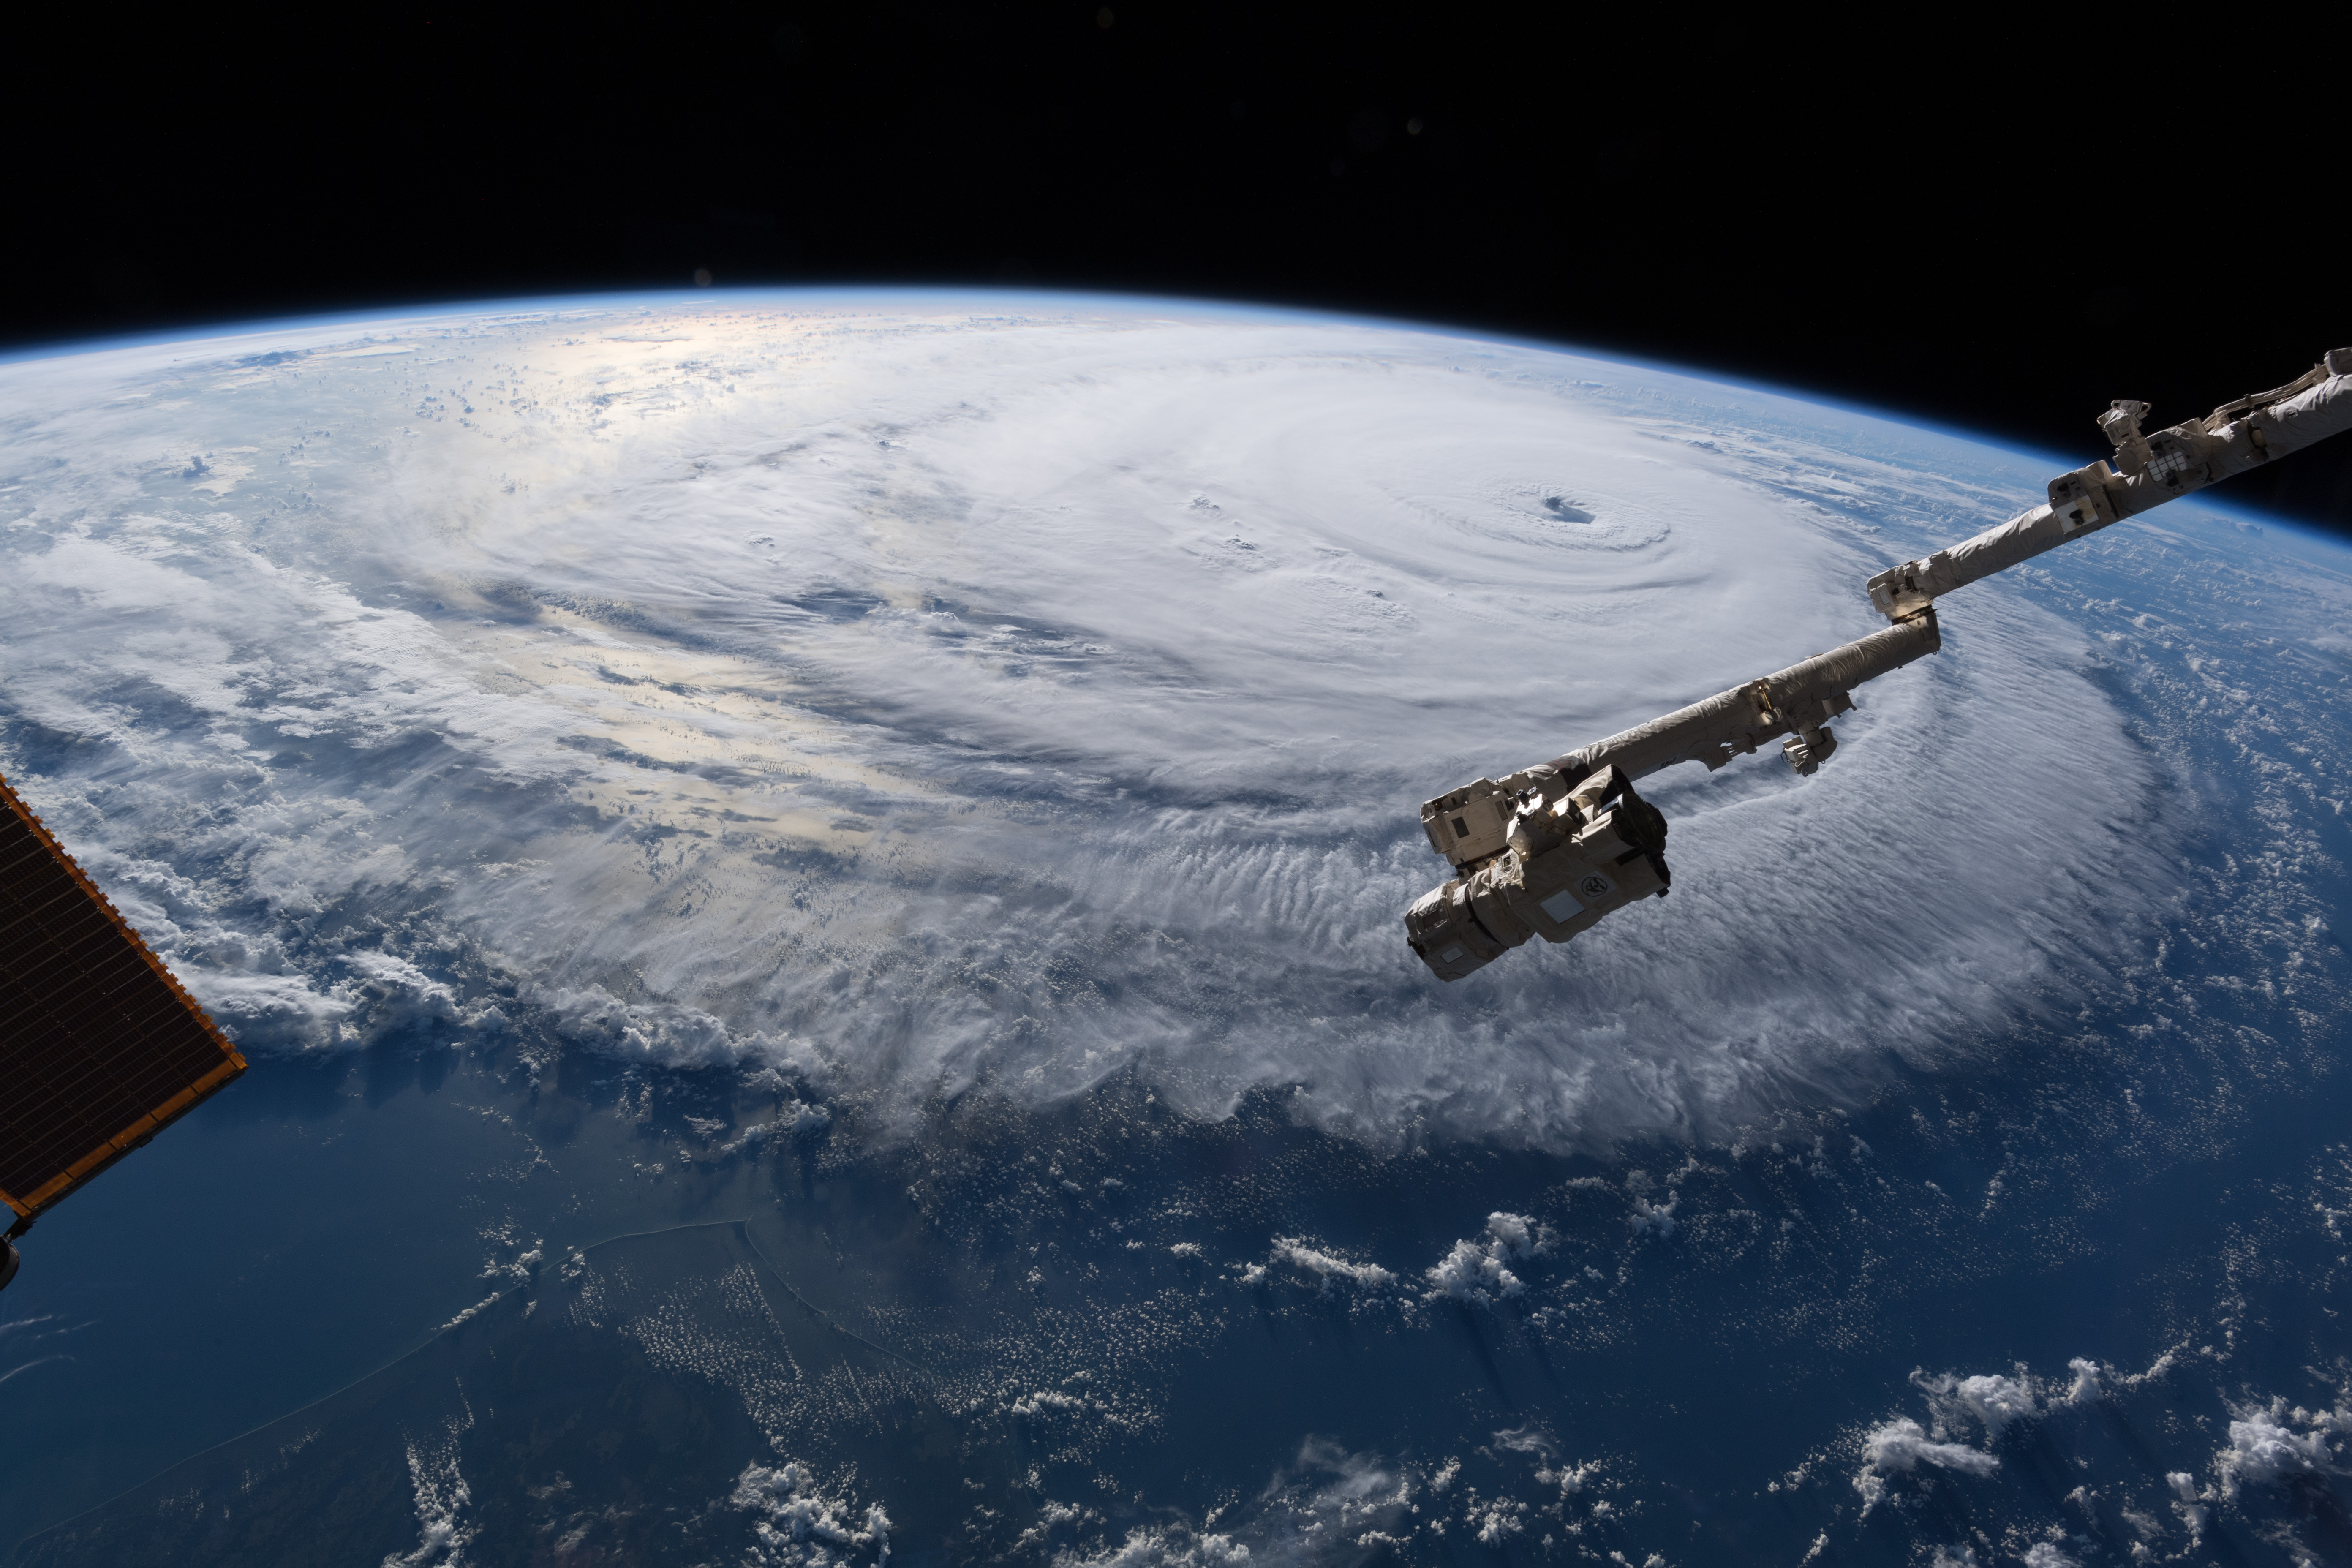 Hurricane Earth Clouds Spiral Cyclone Photography Alexander Gerst NASA Snow Science Space Station Na 5568x3712